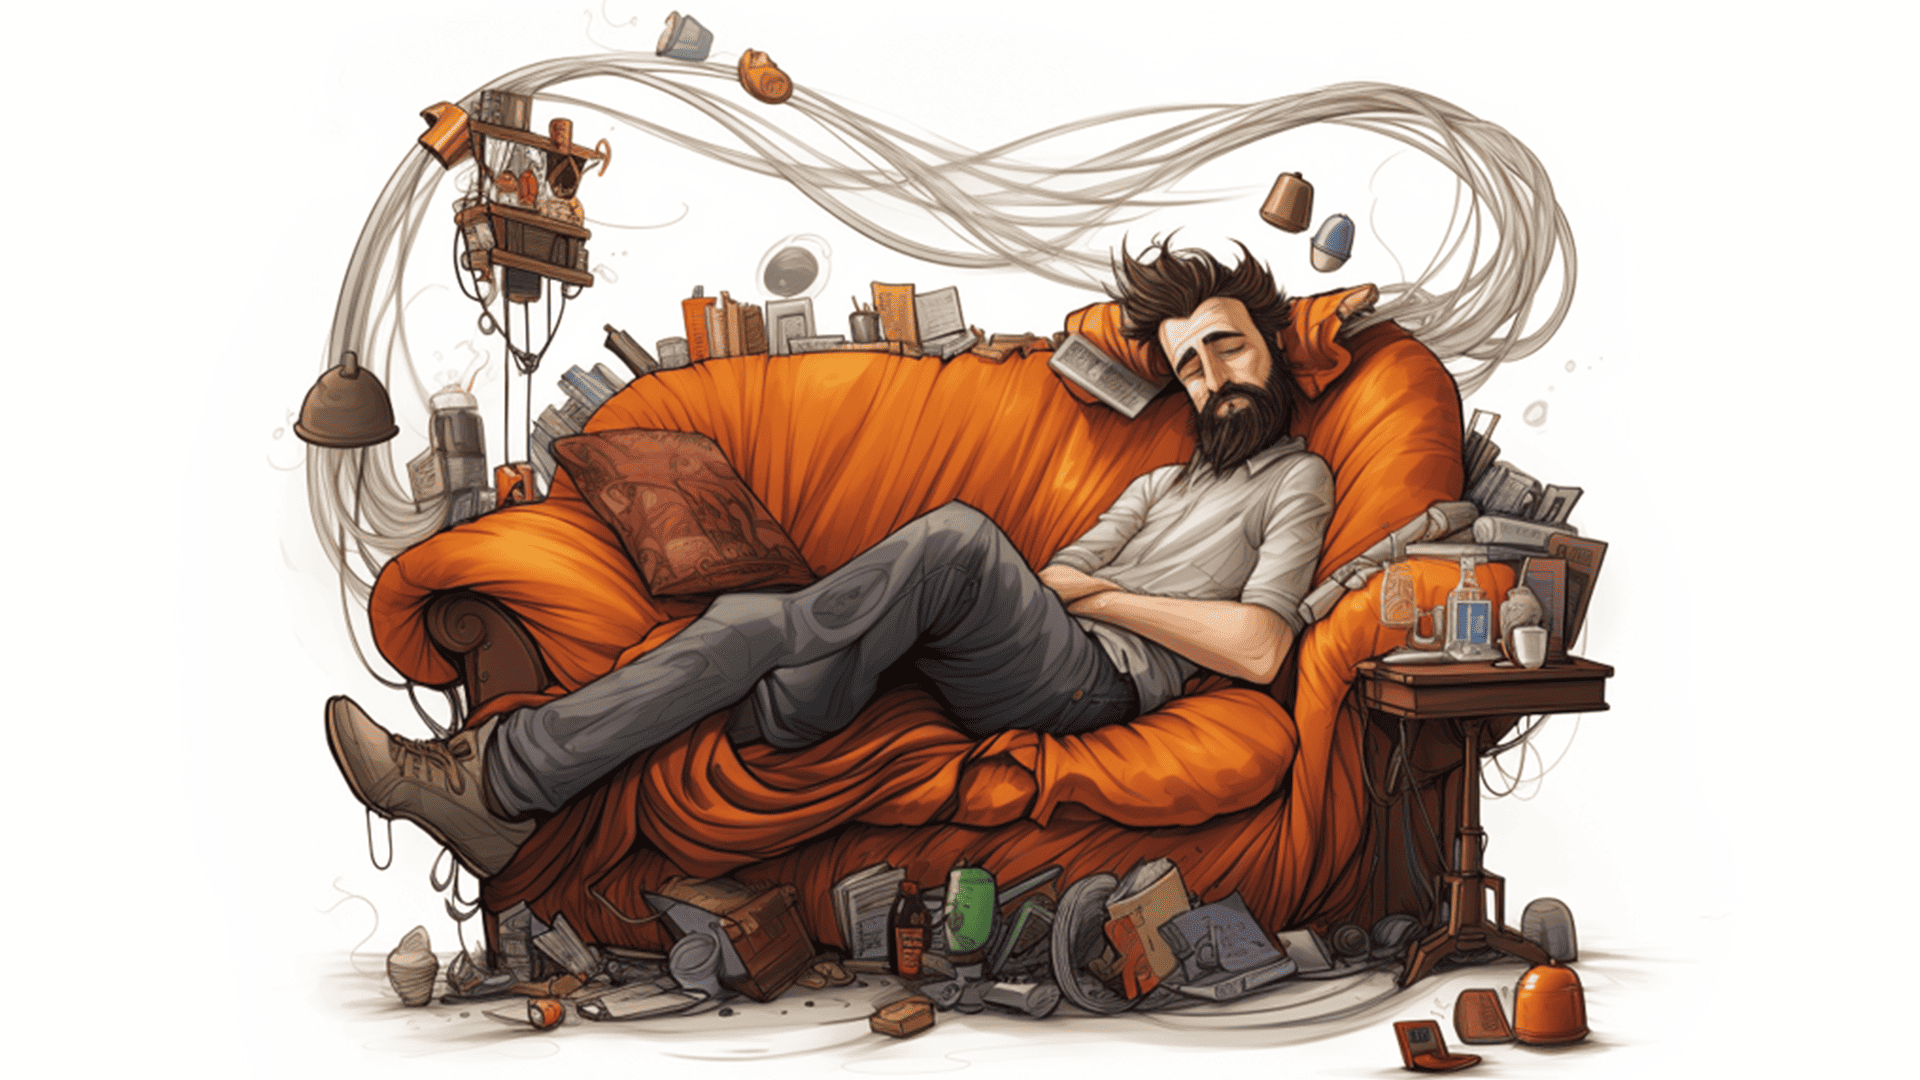 An animated man sleeping on a crazy couch representing the dreams that he's having